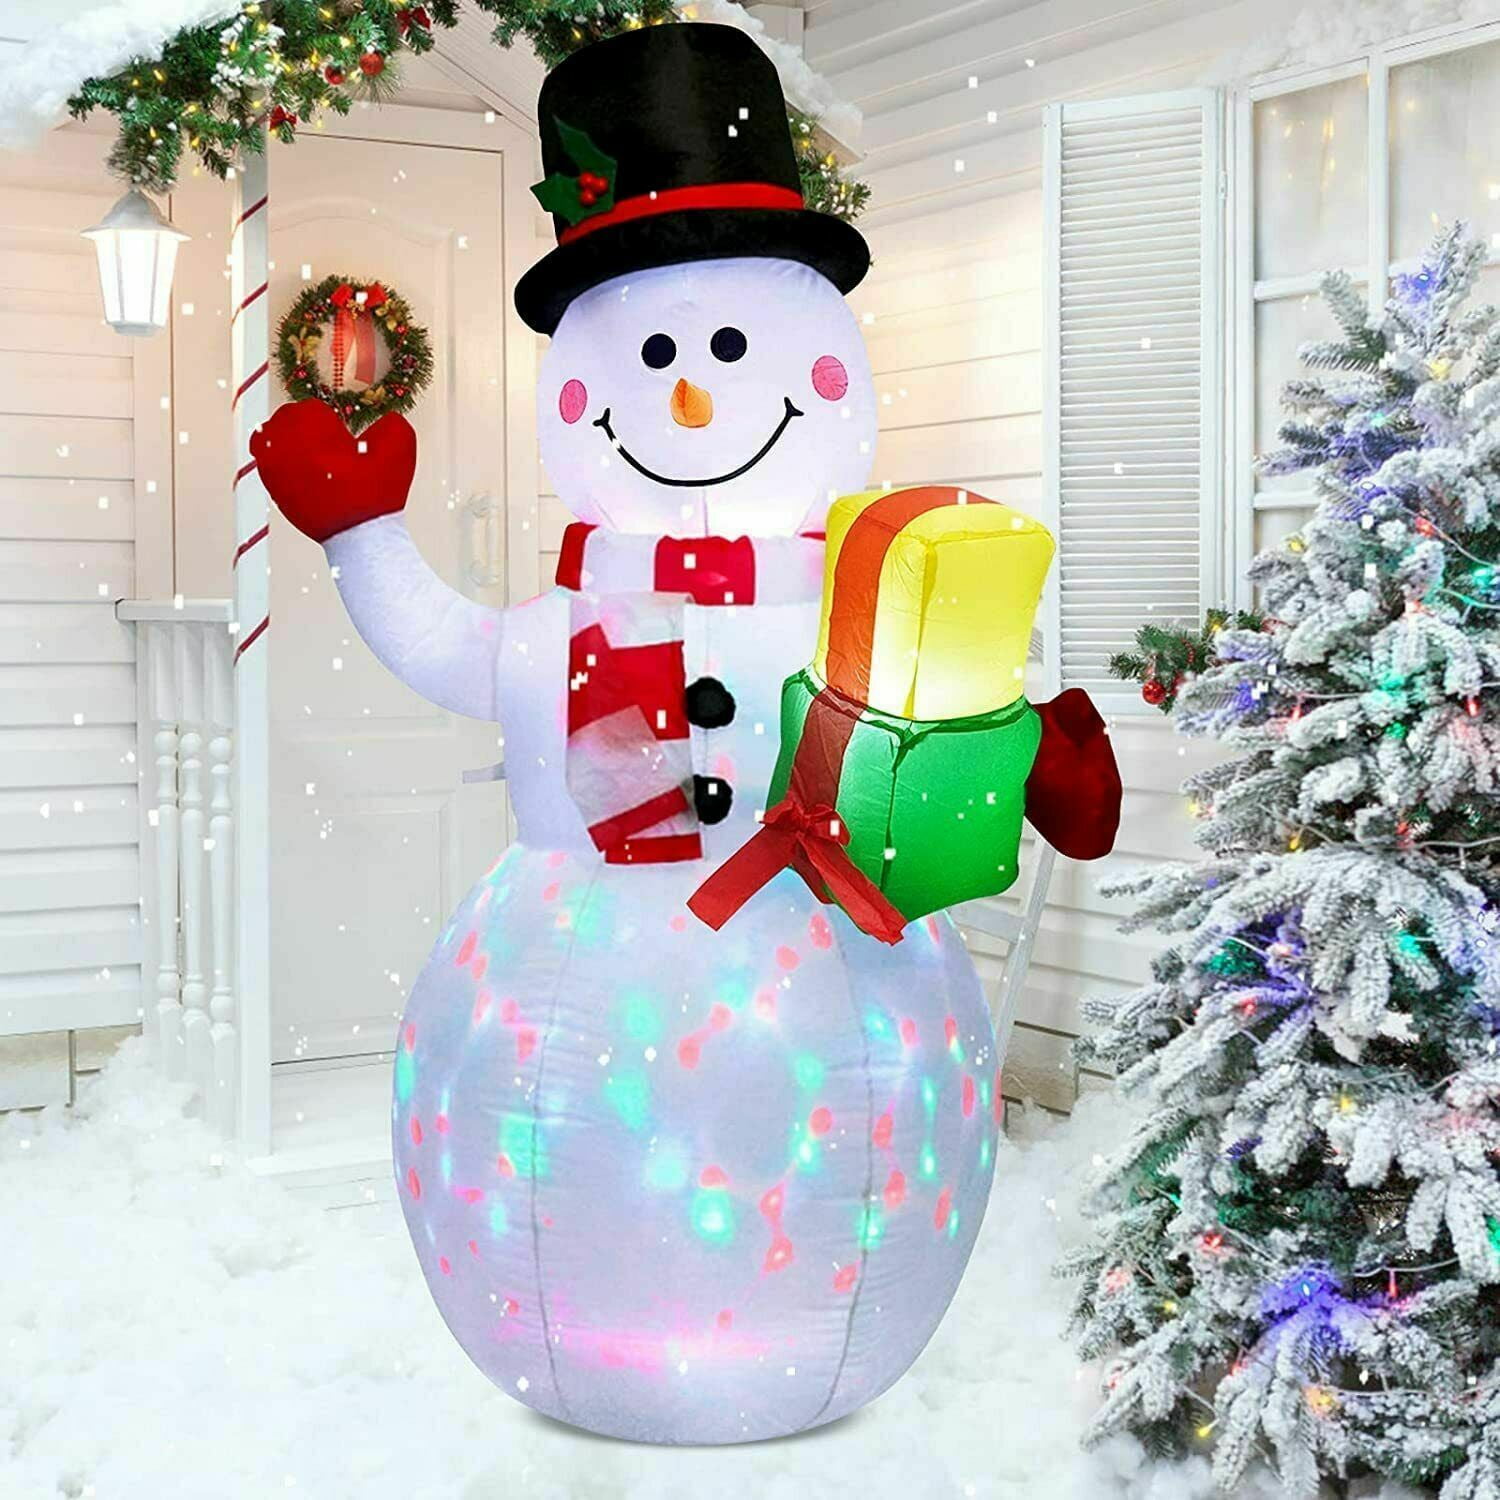 5ft Christmas Inflatables Snowman Outdoor Yard Decor with Rotating LED ...